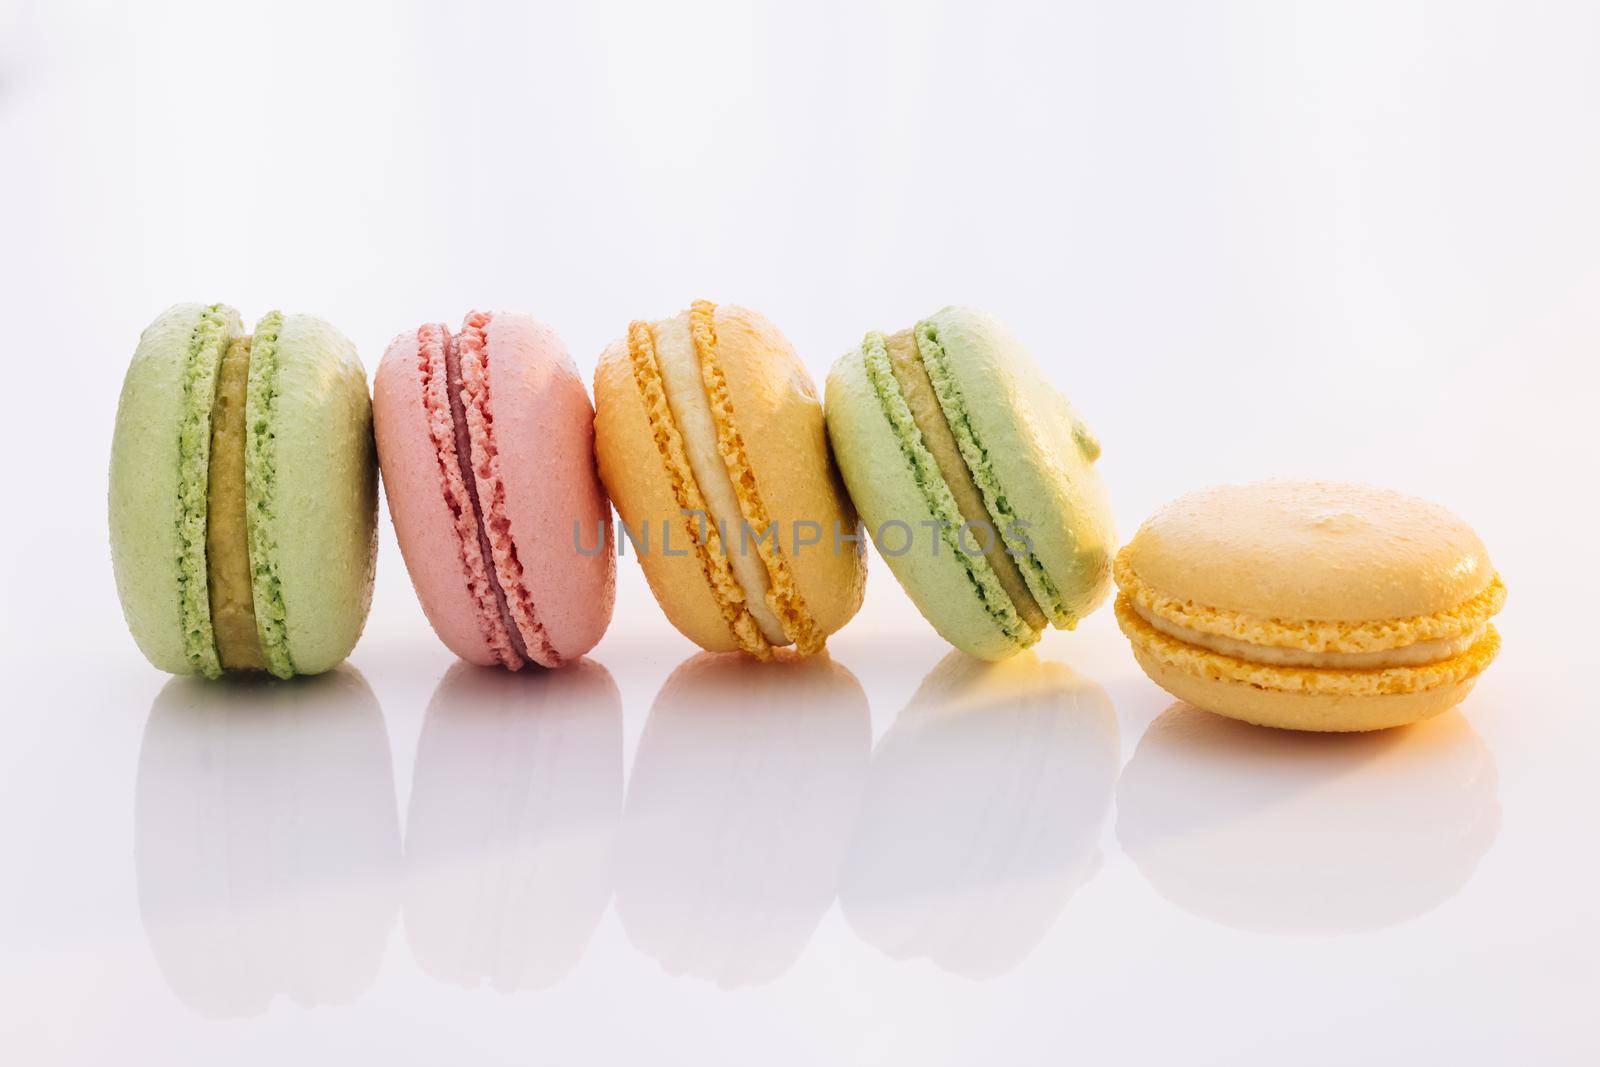 French macarons on white background. Different colorful macaroon. Tasty sweet color macaron. Colorful macarons dessert.